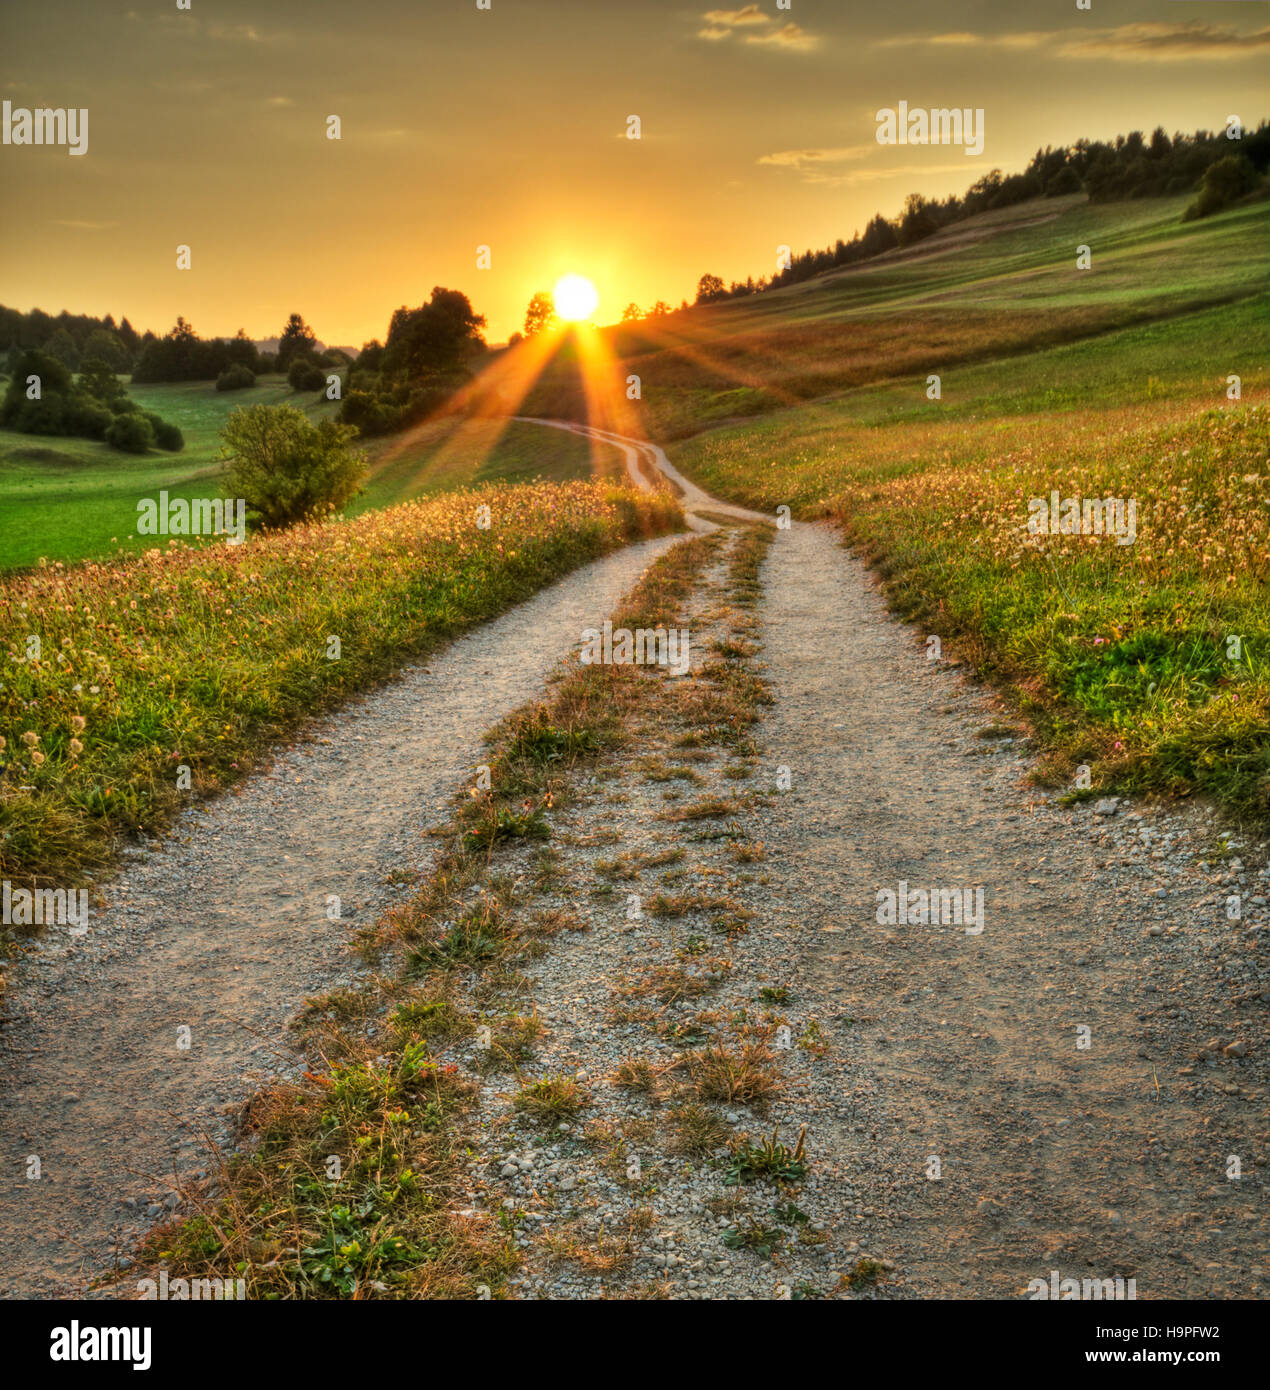 Idyllic sunset on dusty road in countryside Stock Photo